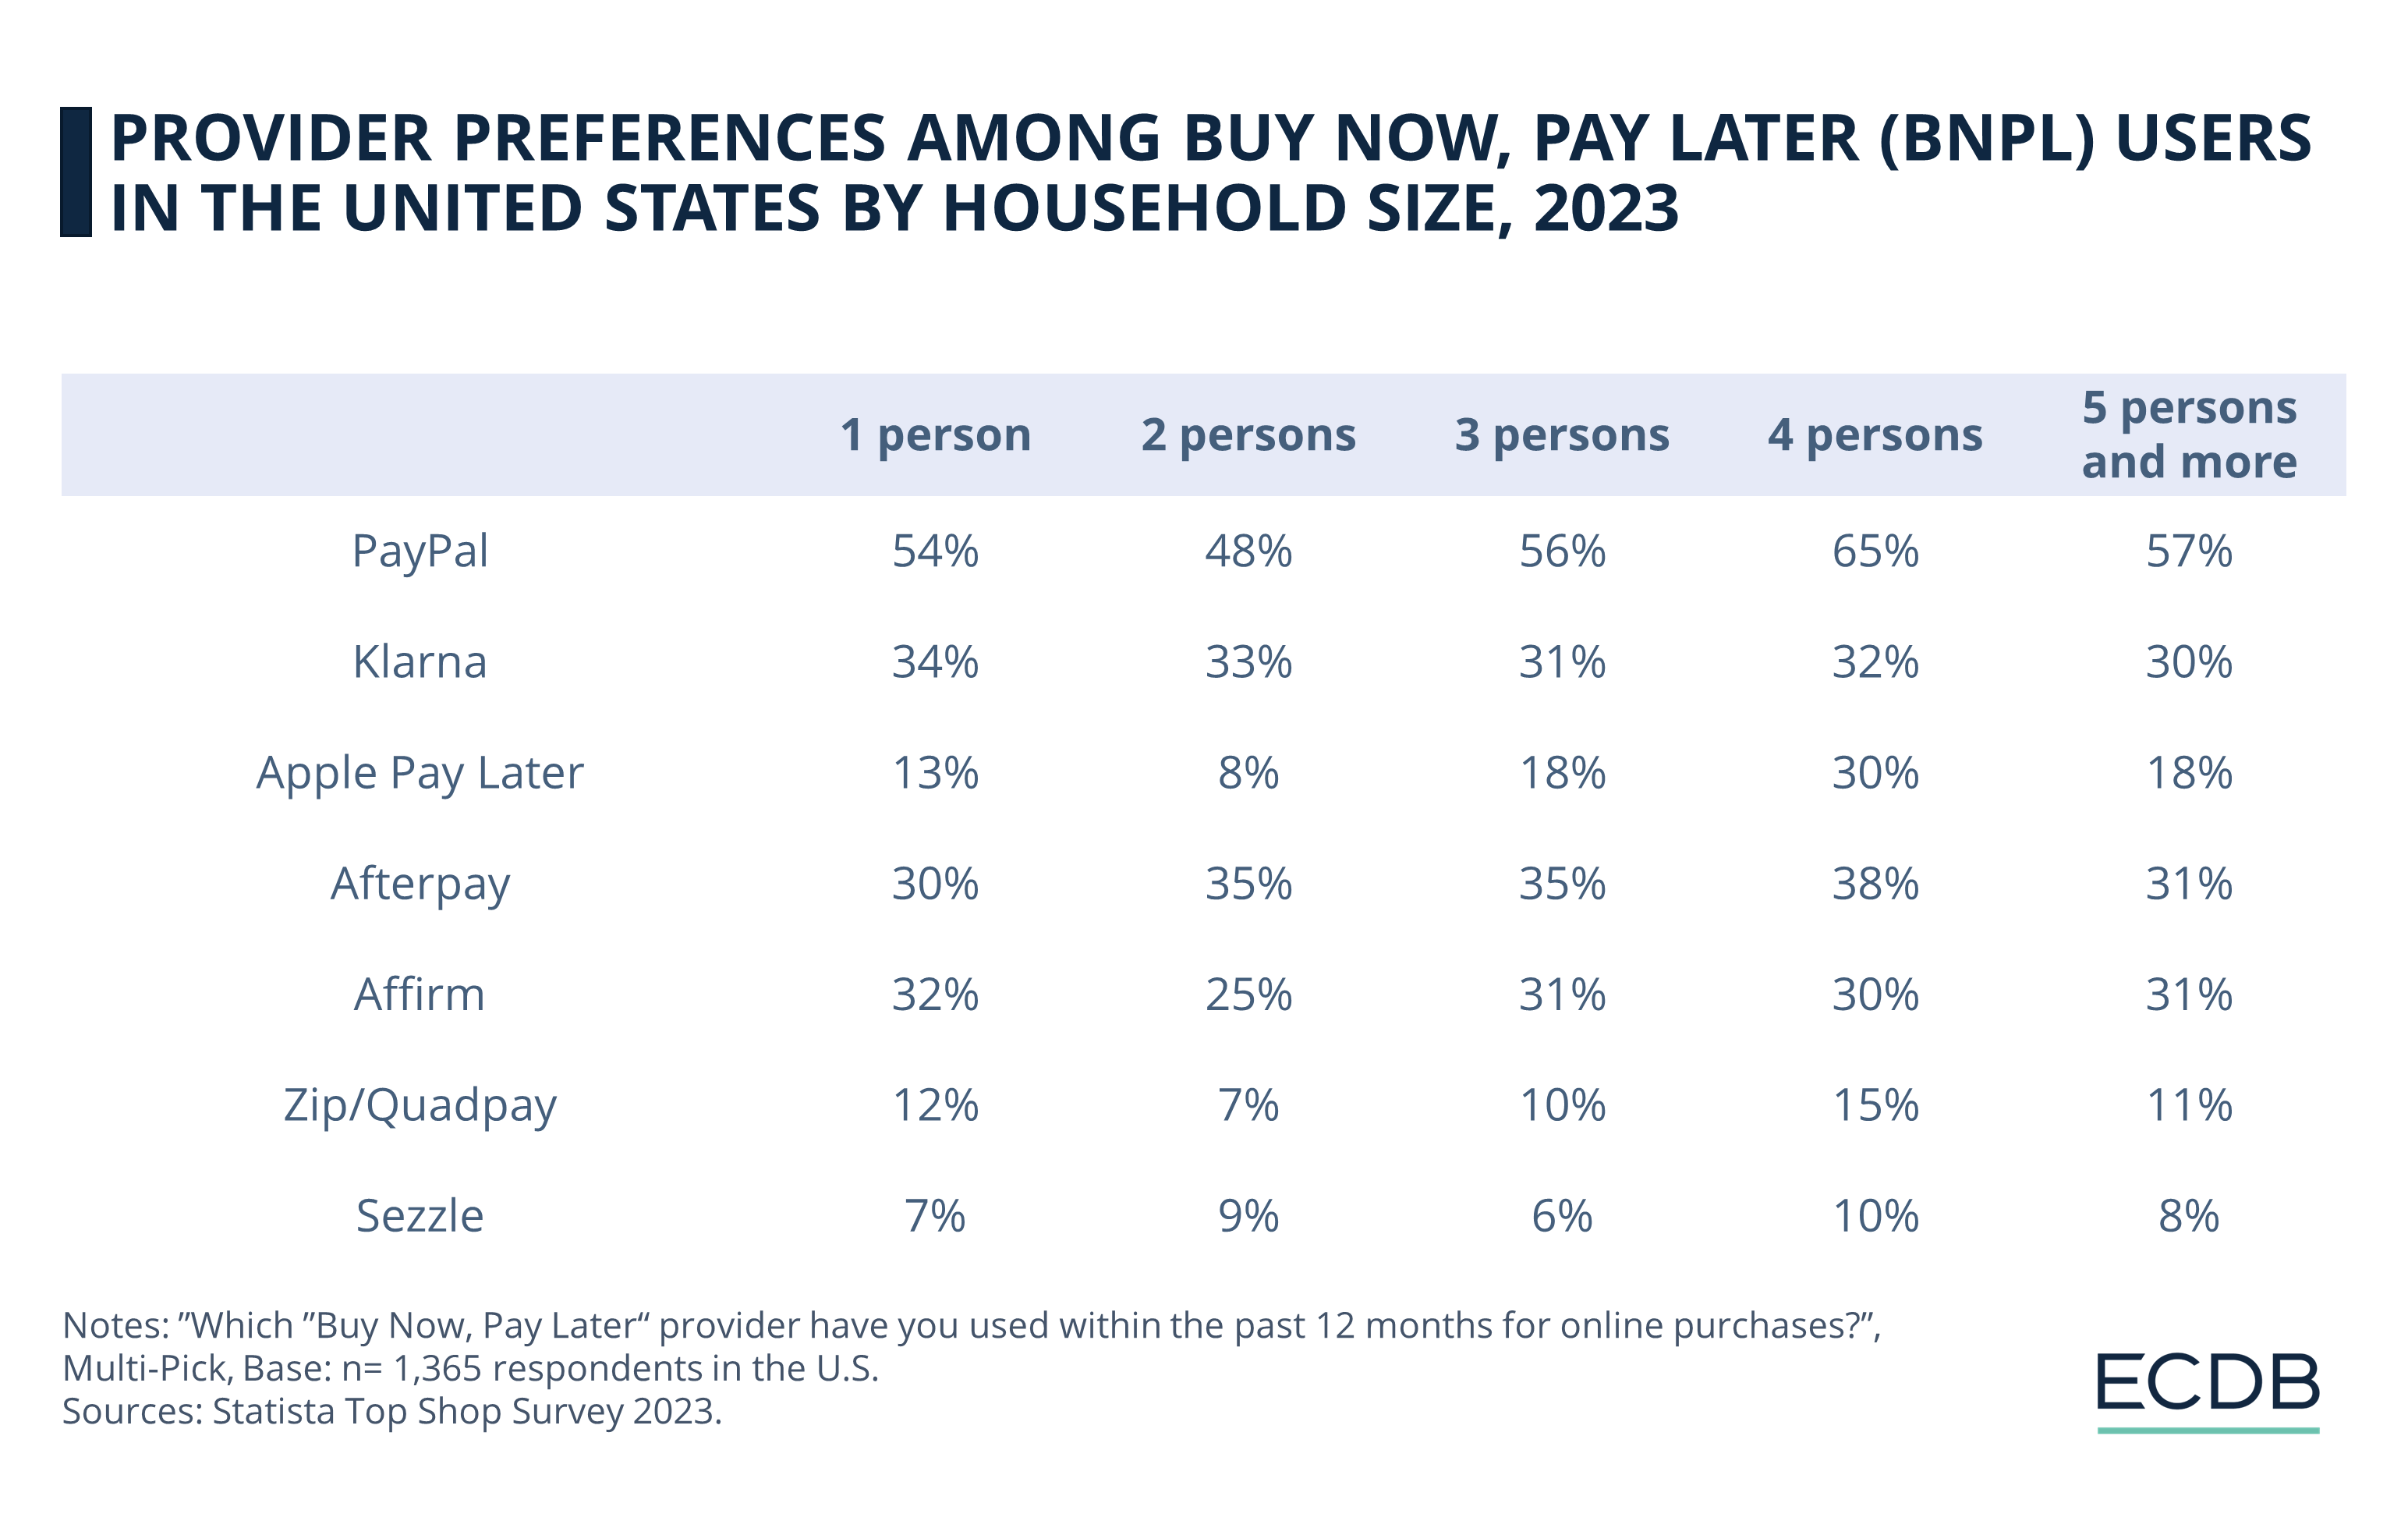 Provider Preferences Among Buy Now, Pay Later (BNPL) Users in the United States by Household Size, 2023